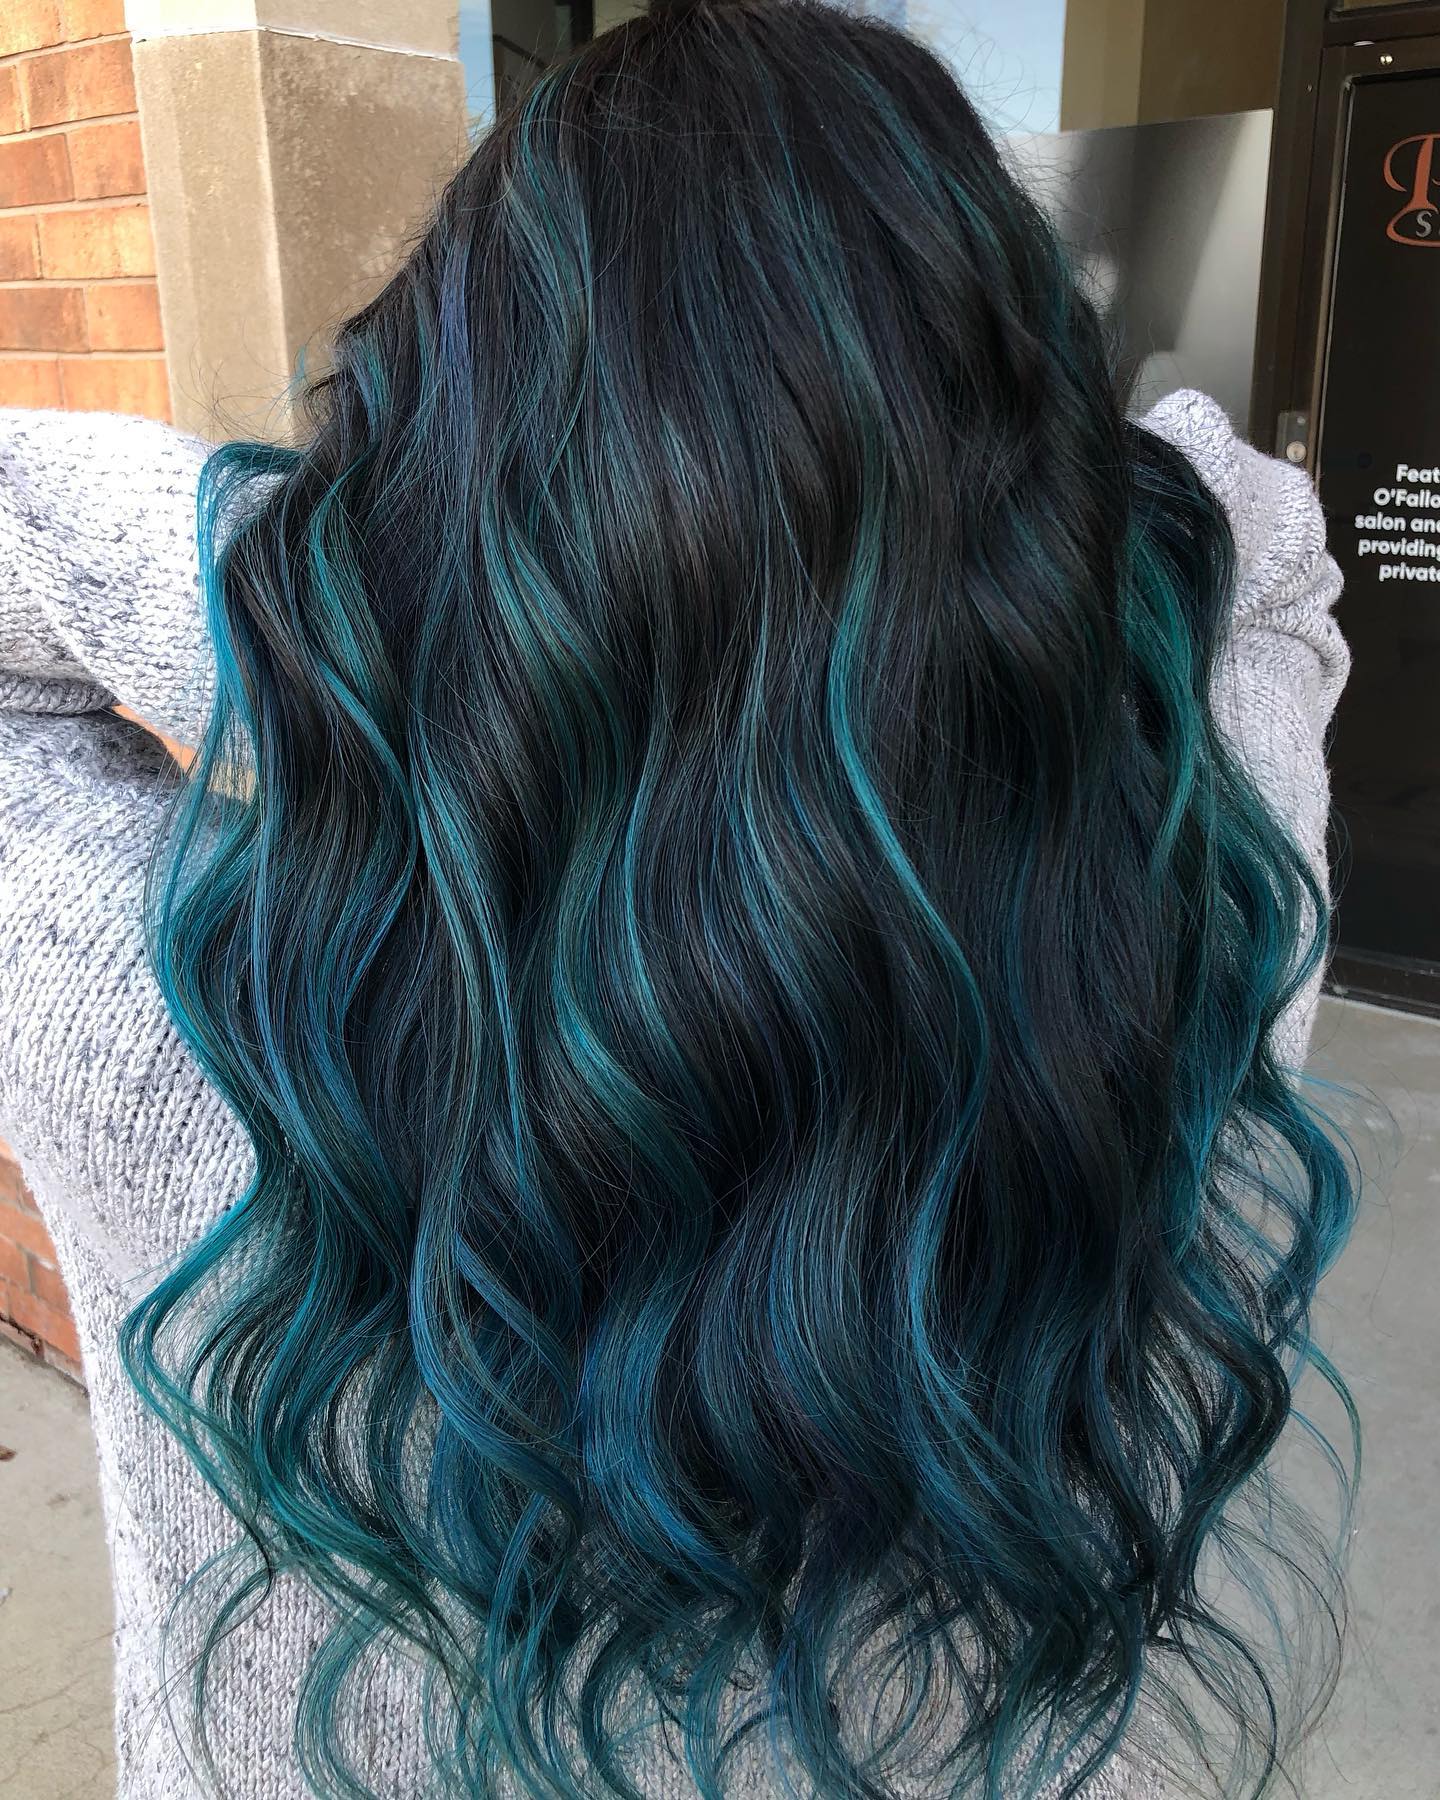 22 Cool Turquoise Hair Ideas for a Bold and Vibrant Look - Hairstyle